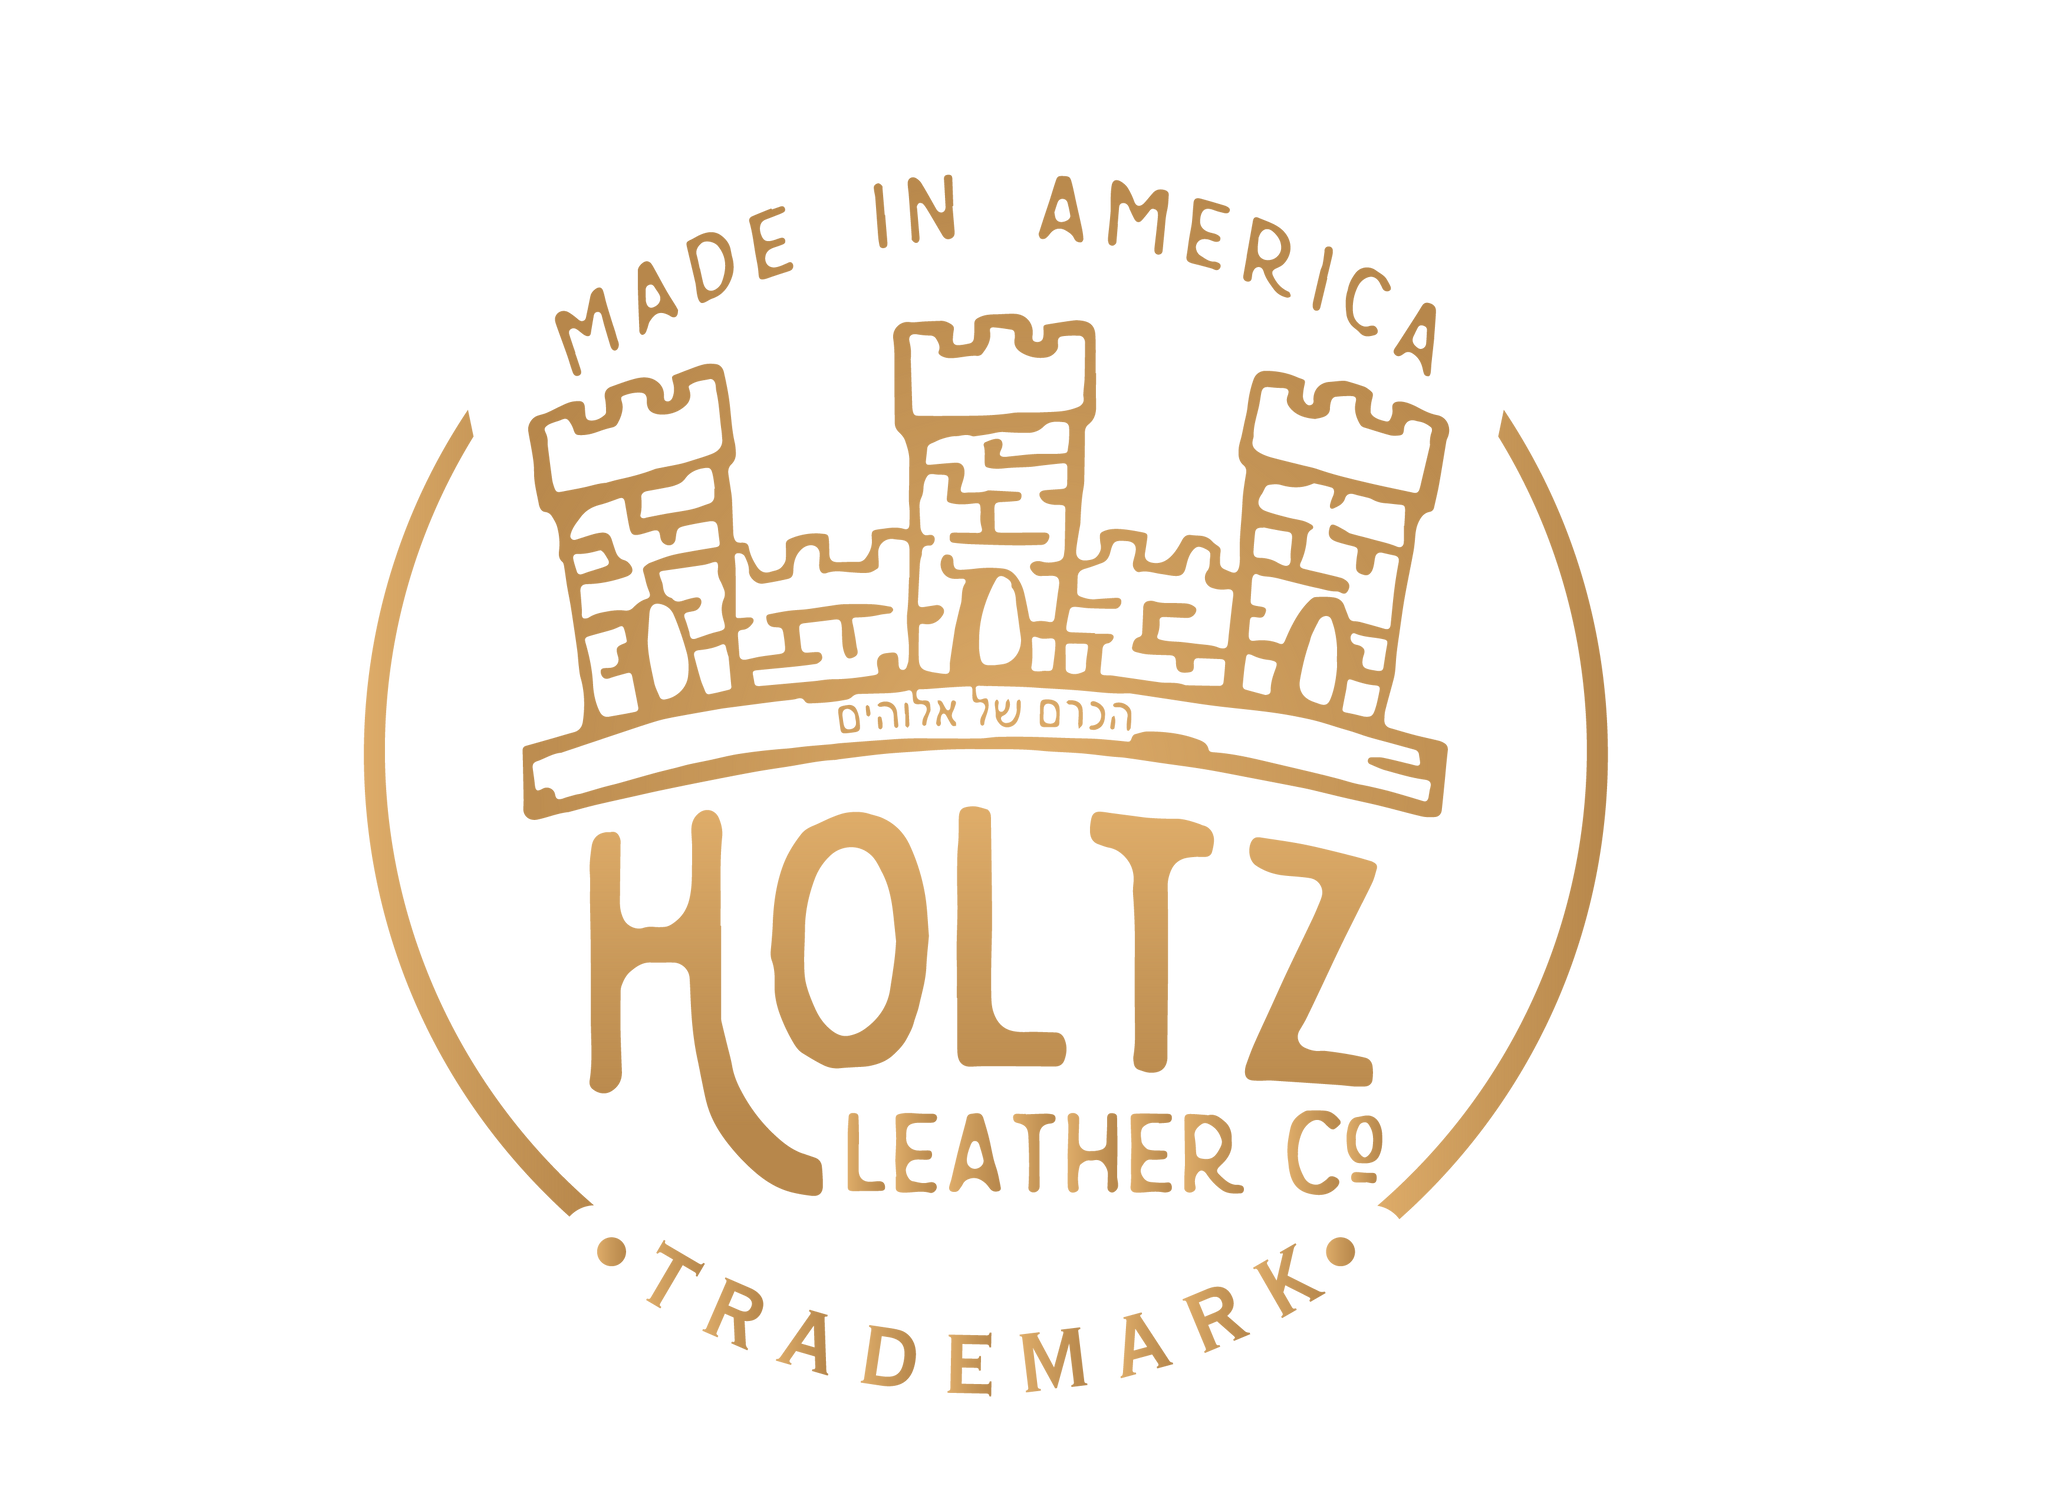 Holtz Leather Co. - Handcrafting Fine Leather Goods - Made in America